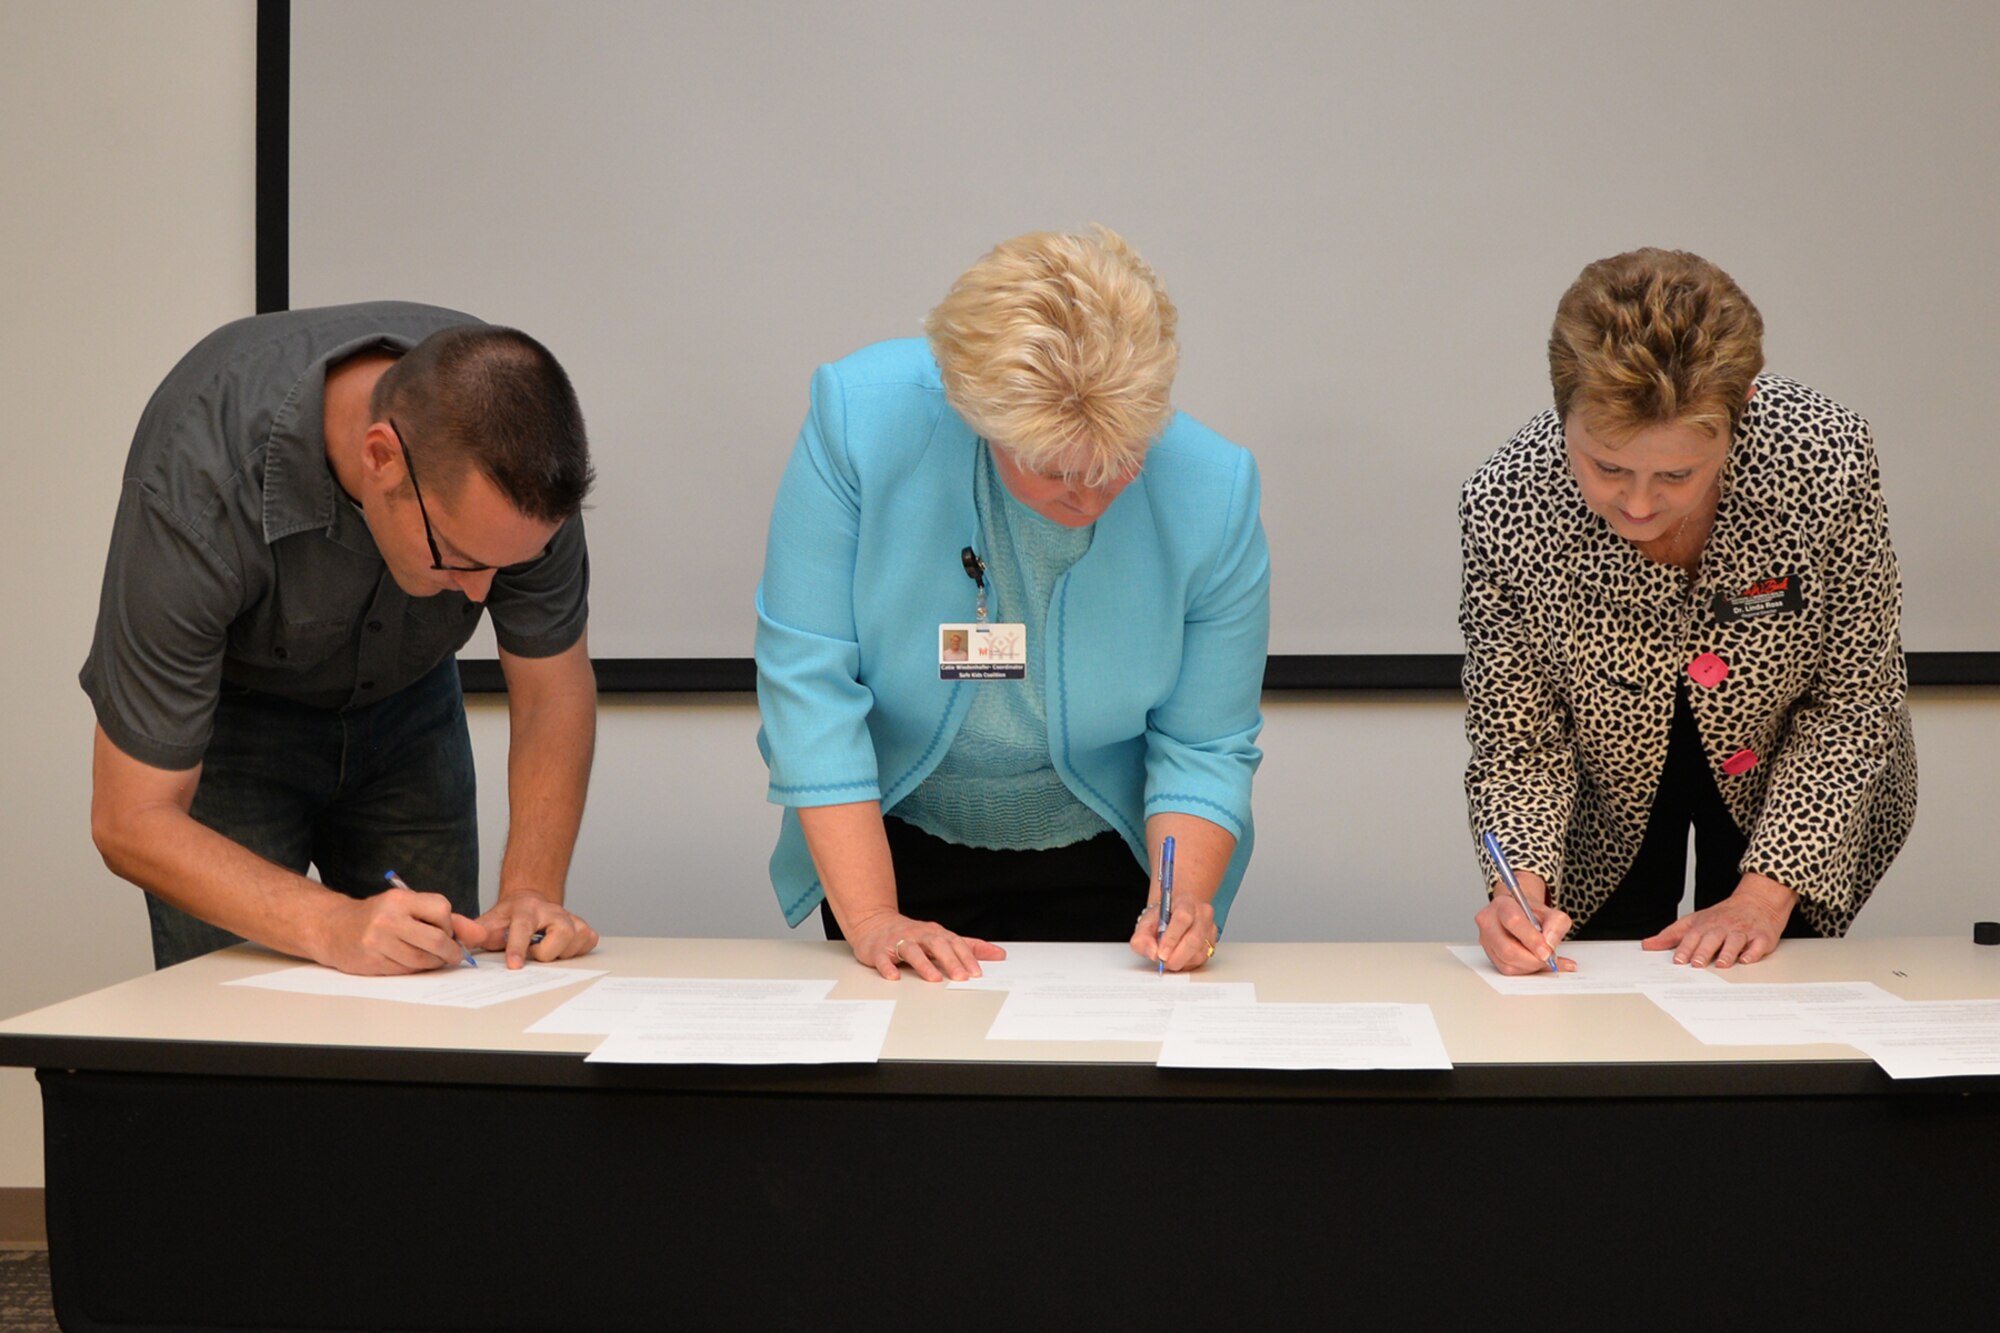 Neil Townley, 17th Training Wing Safety chief; Catie G. Wiedenhofer, Safe Kids San Angelo coordinator; and Dr. Linda C. Ross, Laura W. Bush Institute for Women’s Health director, sign Memorandums of Understanding at the Devon Energy office in San Angelo, Texas, April 20, 2016.  The purpose of the Safety Risk Reduction Programs for All Ages MOU is to set the conditions governing the training of personnel and families from Goodfellow and Tom Green County. (U.S. Air Force photo by Airman 1st Class Randall A.S. Moose/Released)